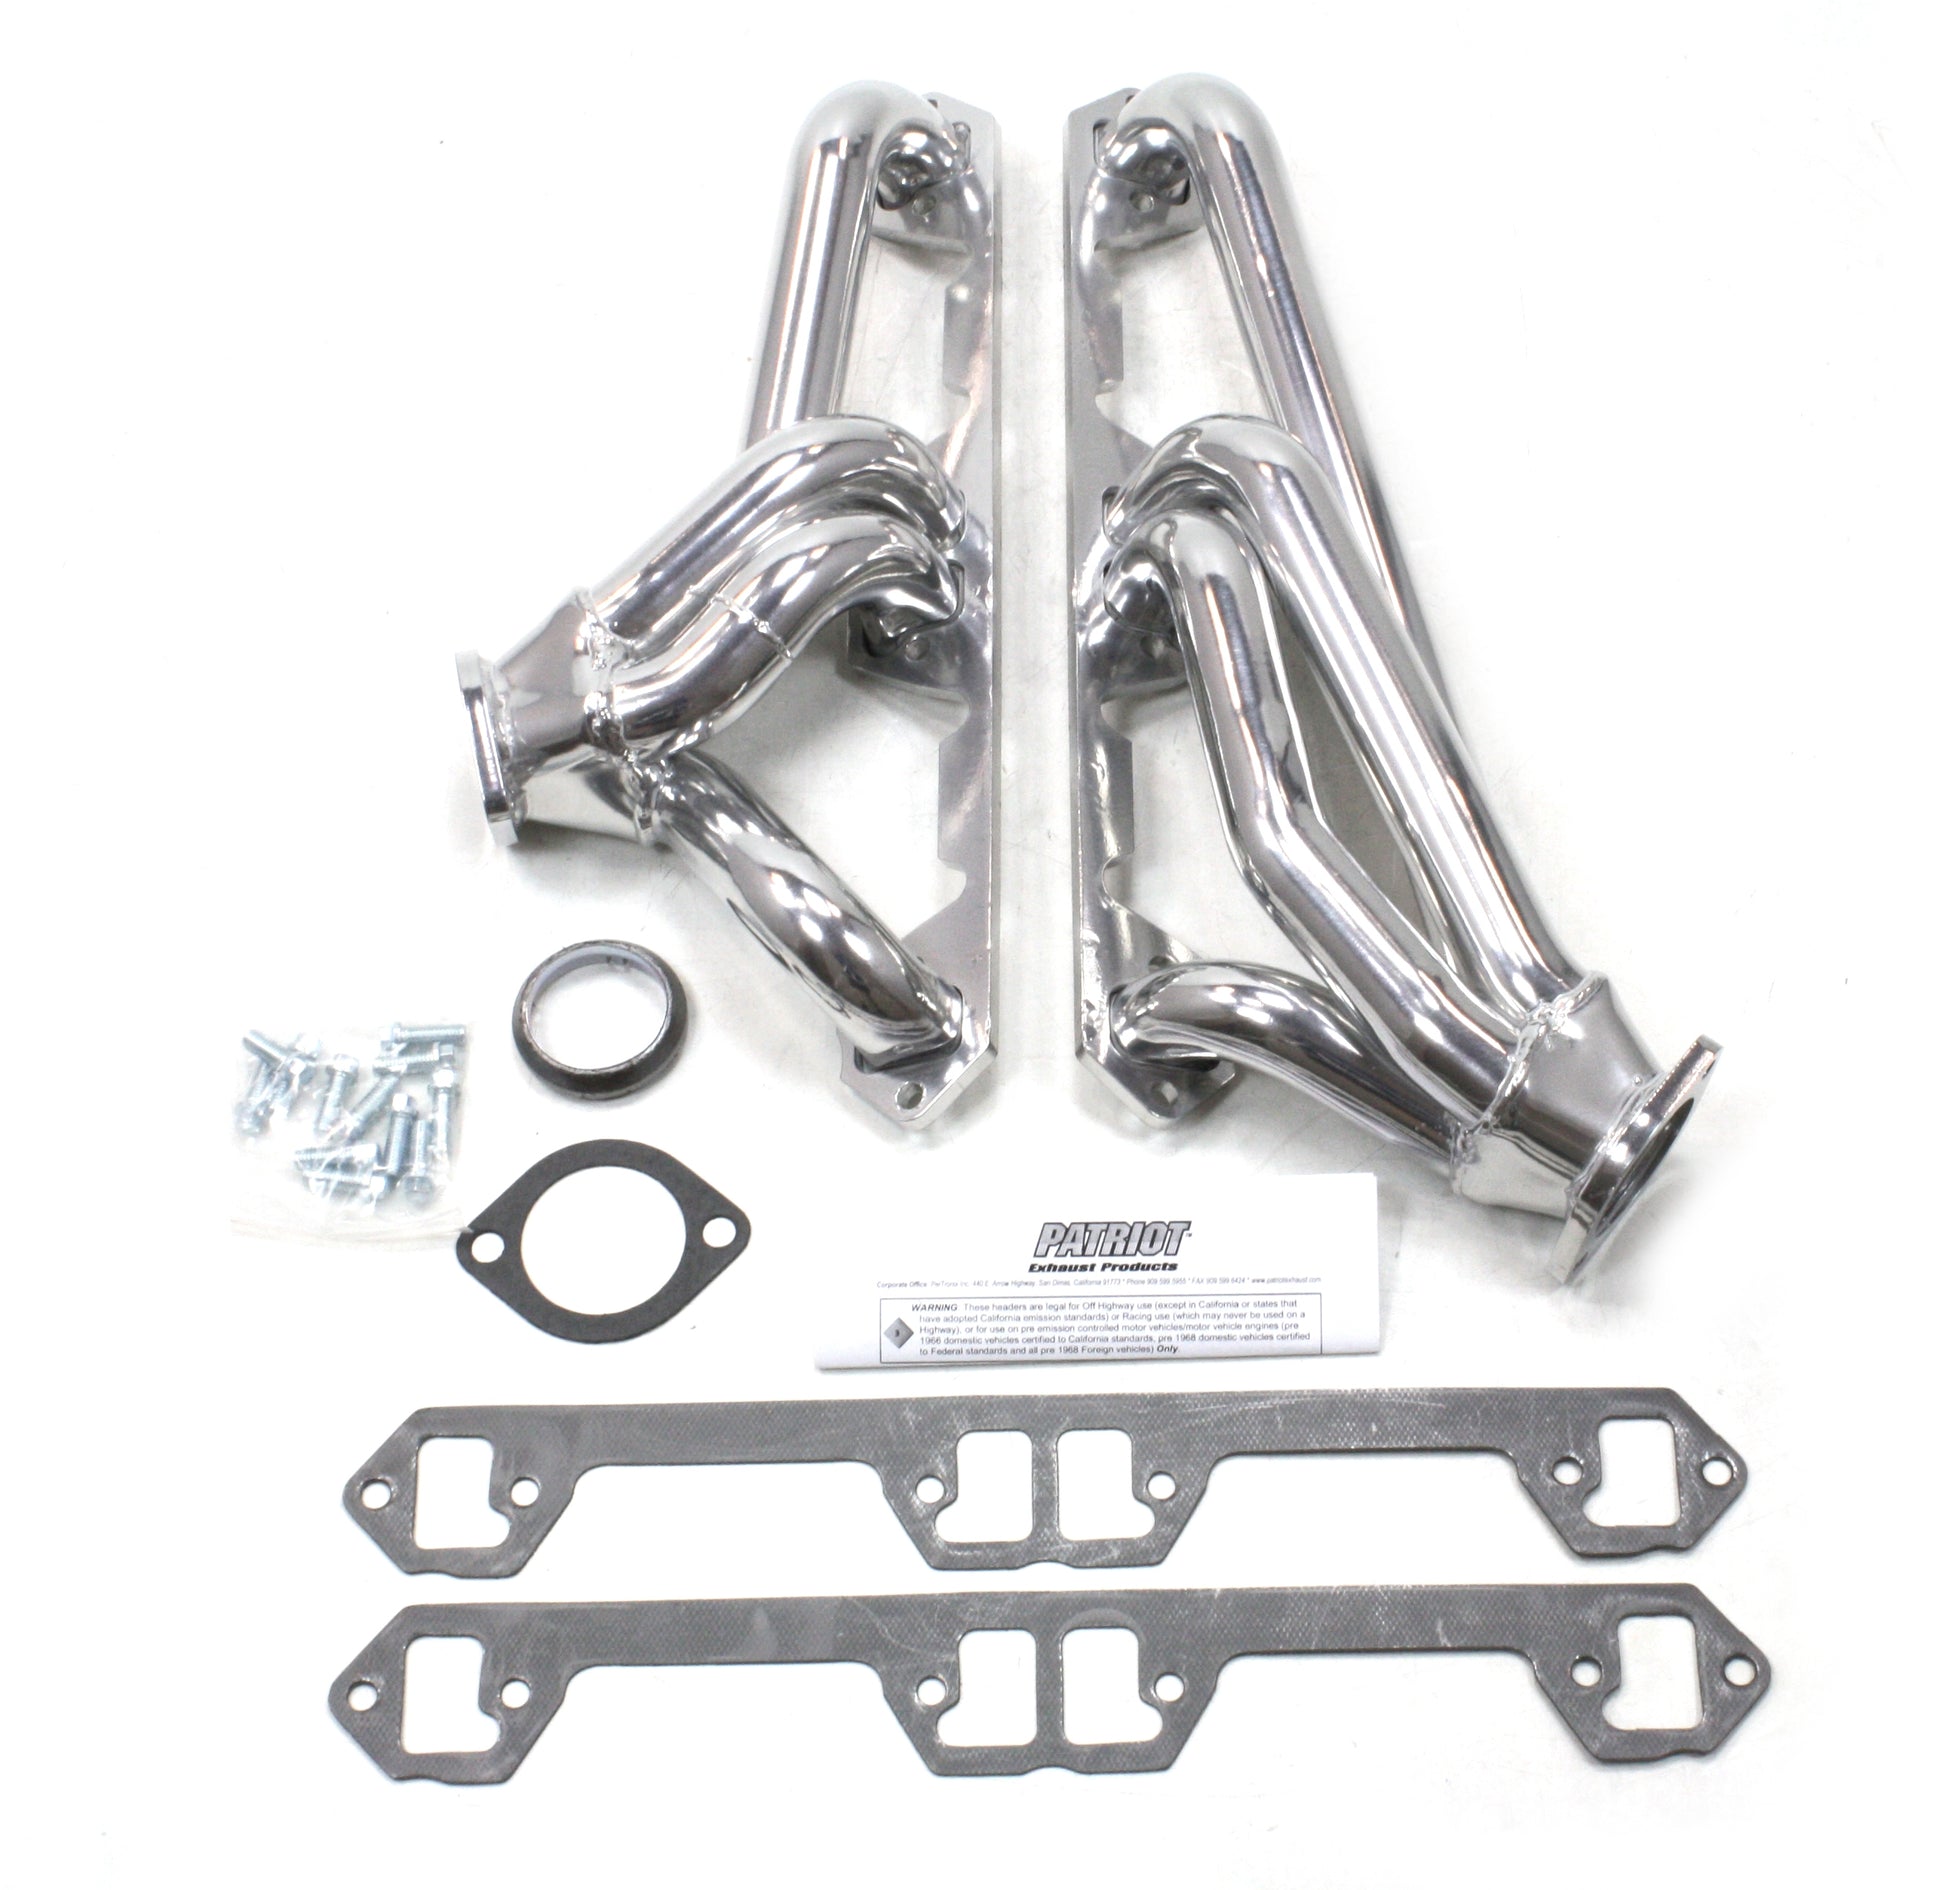 Patriot Exhaust H8600-1 1 5/8" Clippster Direct Replacement  Header with dog leg ports 68-70 AMX, Javelin, Rebel, Ambassador 290-390 71-74 Javelin, Rebel, Ambassador 304-401 72-79 CJ5,7,8, Cherokee 74-83, Wagoneer 71-91, J10, J20 71-88 Cherokee Metallic C